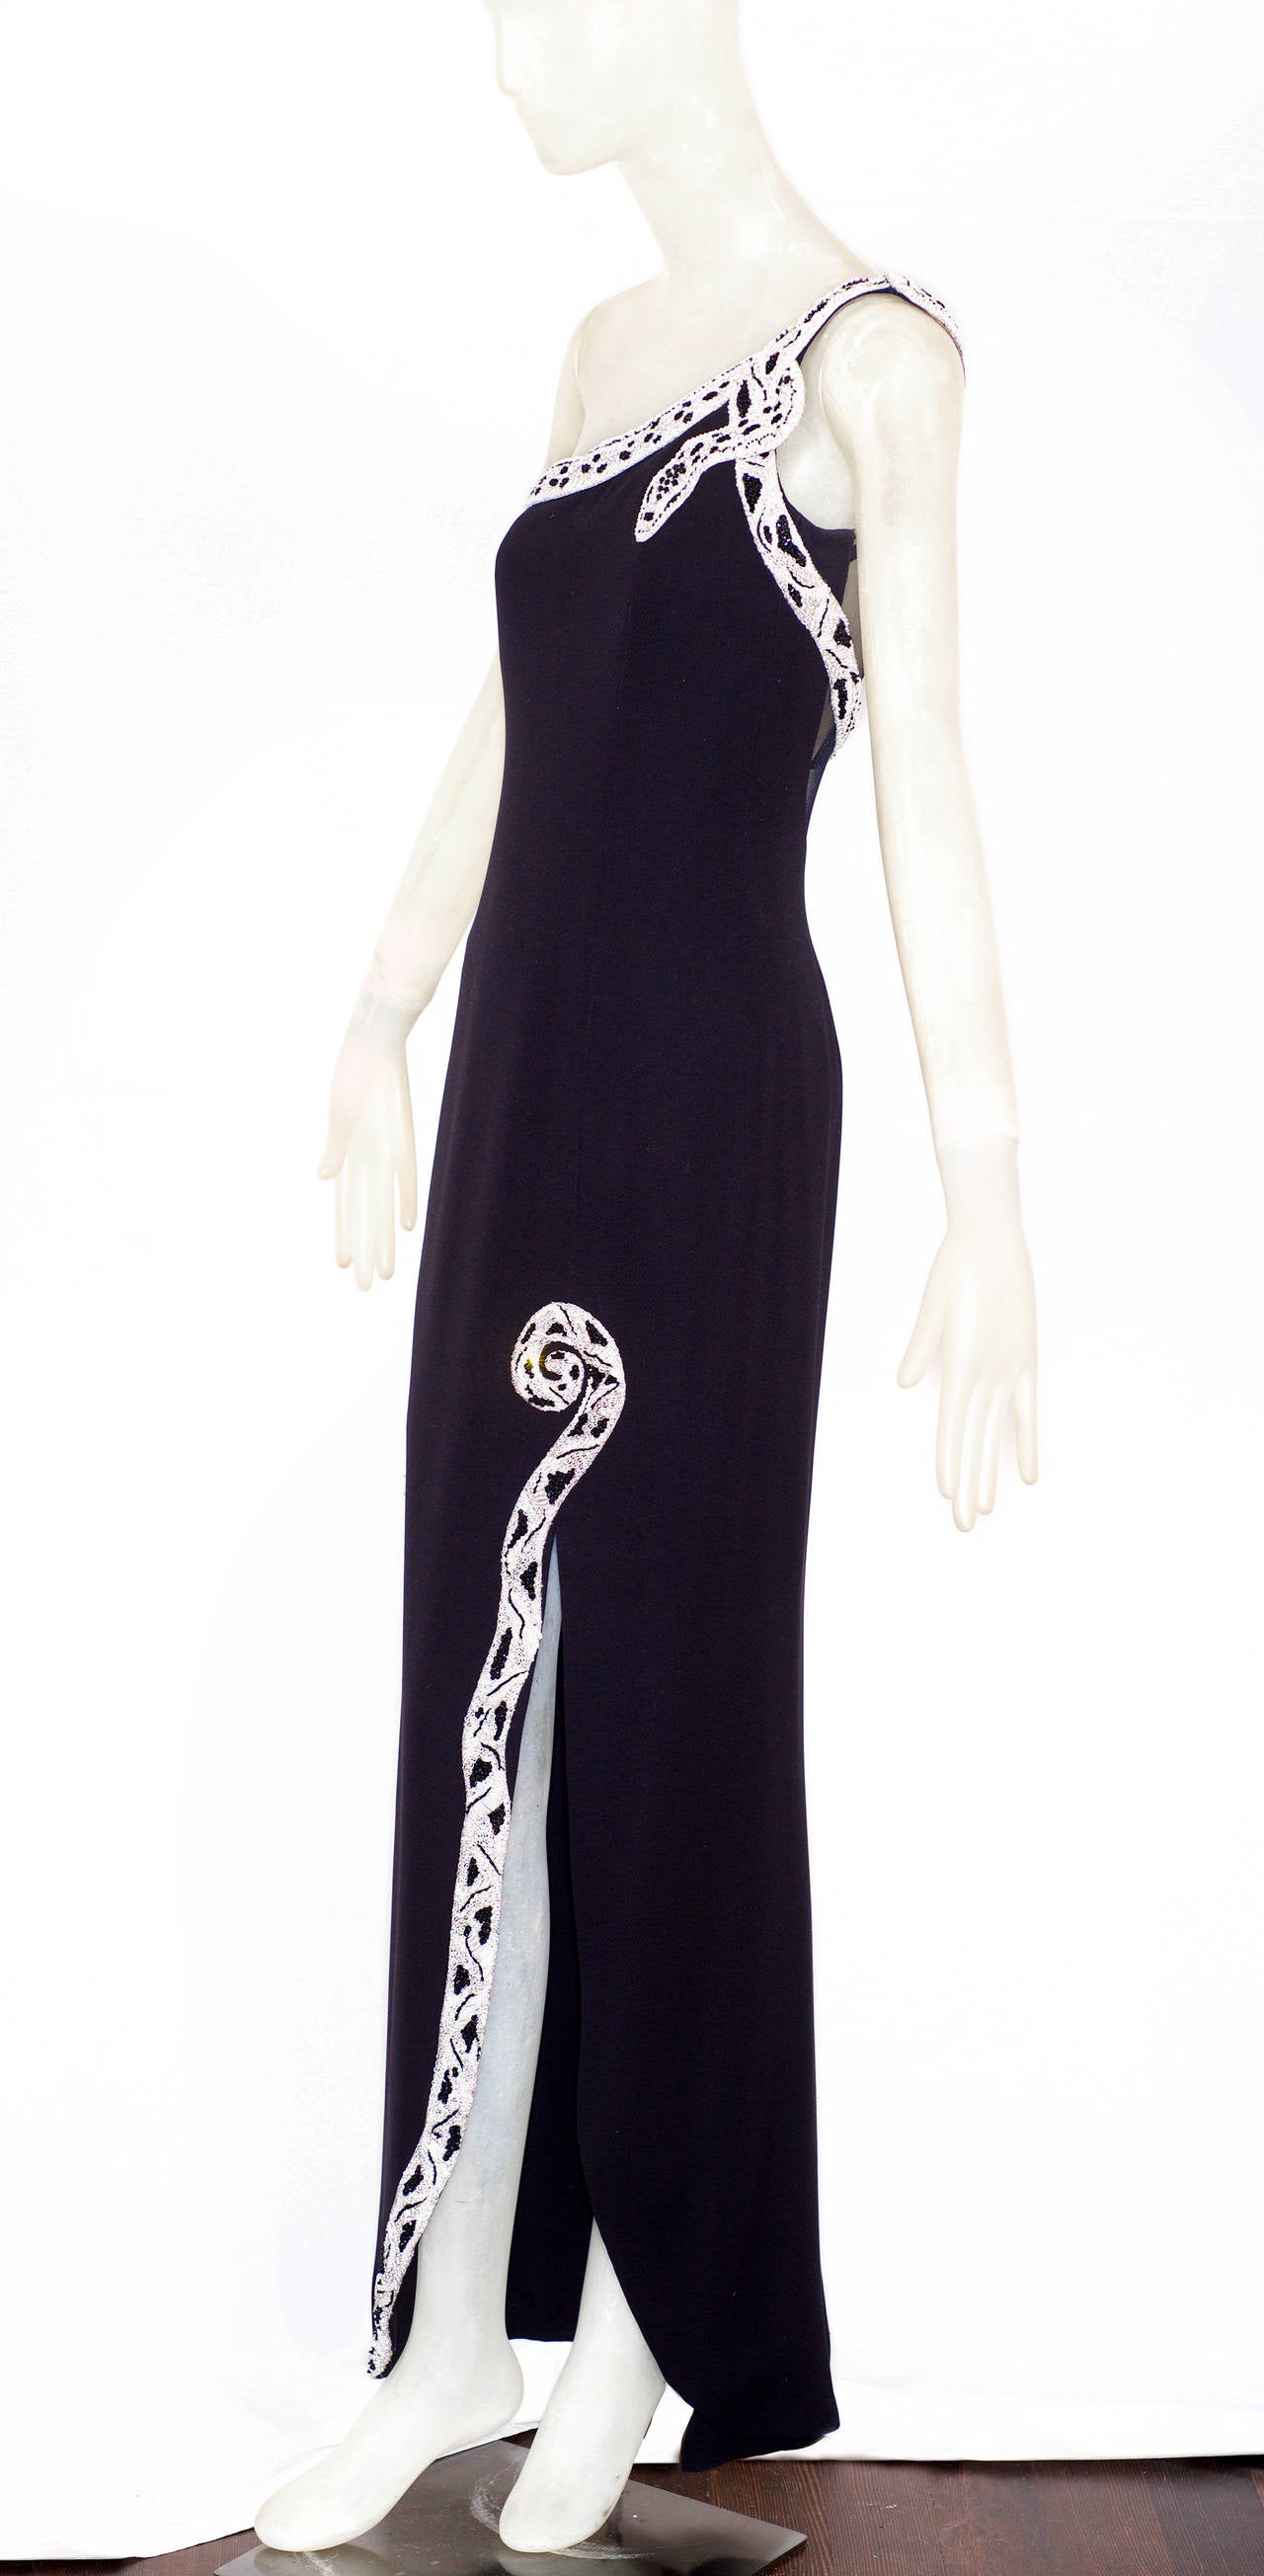 An extraordinary example of Italian glamour by Valentino.  Circa 1970s four ply silk crepe gown, with Goddess style one shoulder strap adorned with a bijoux-embroidered python.  The python wraps itself around the front bodice to the back.  The back